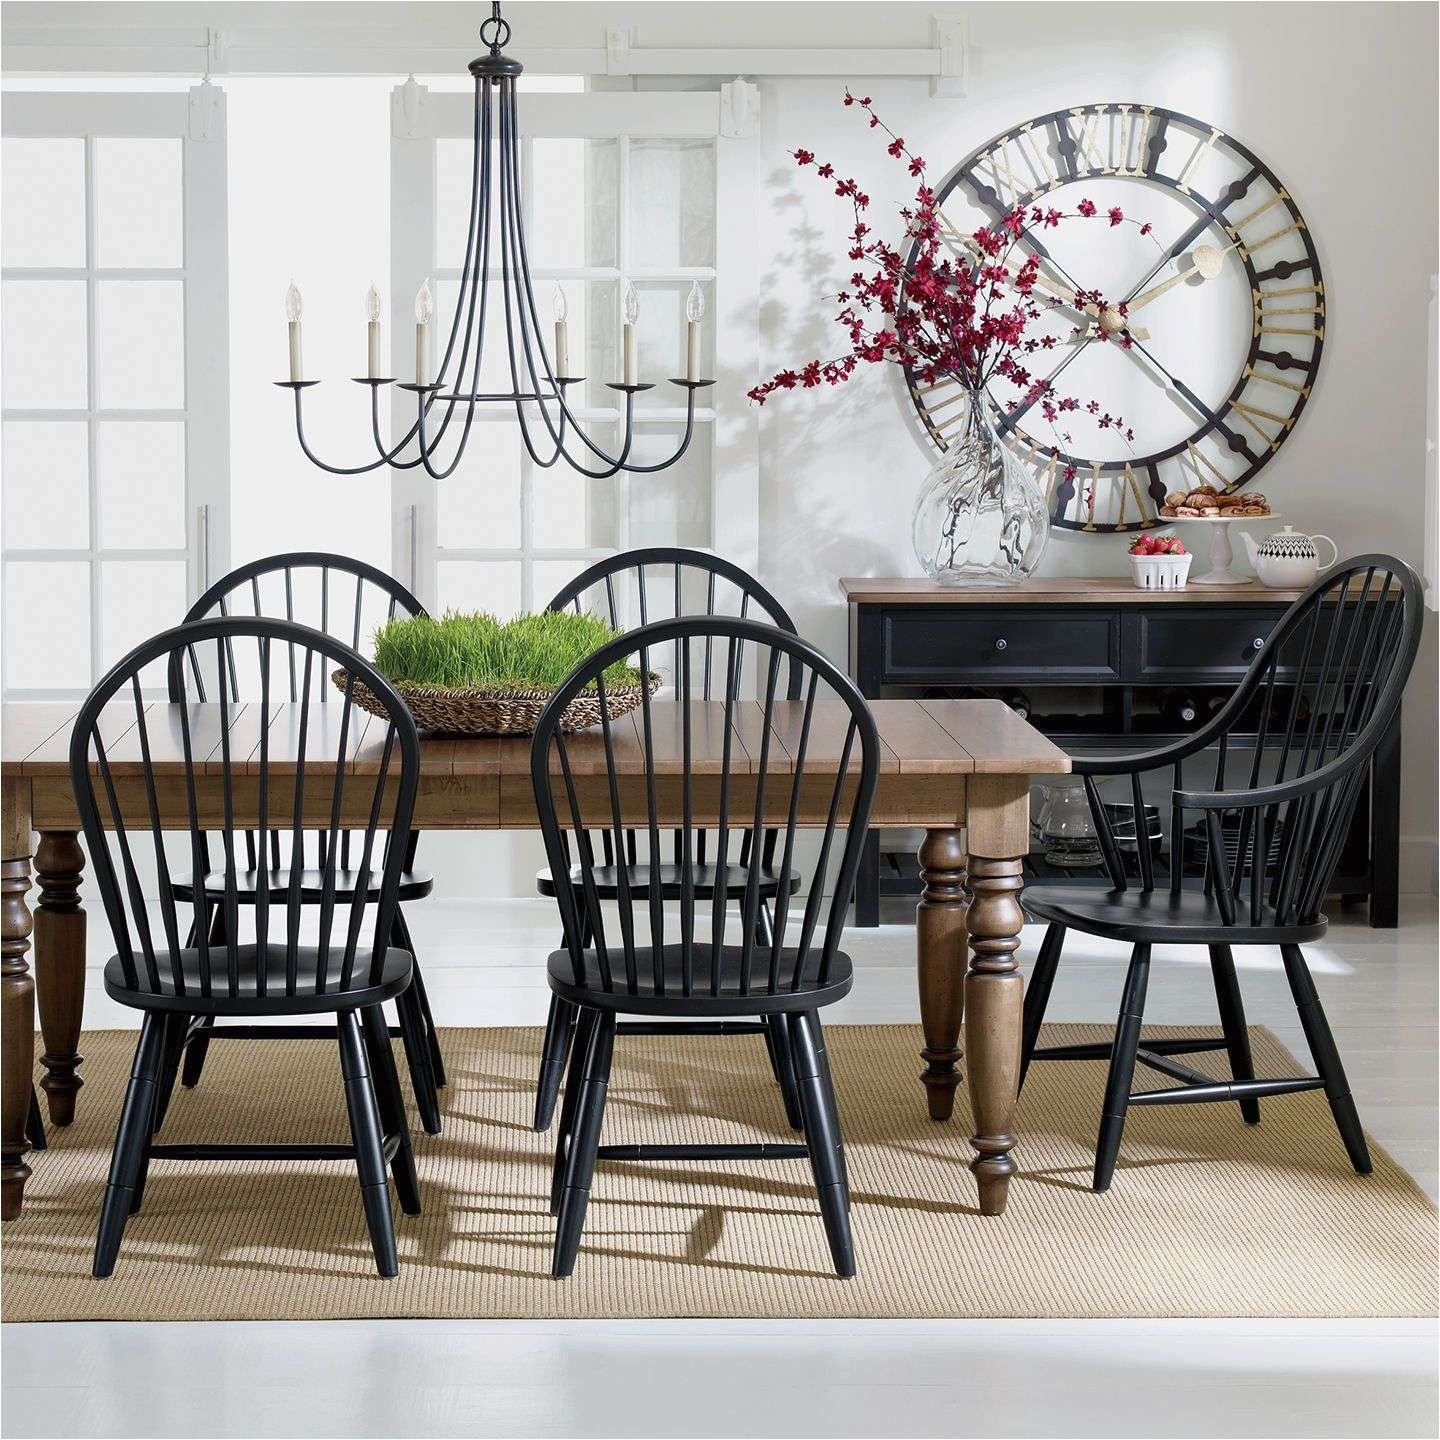 Ethan Allen Country French Collection Bedroom Black and White Dining Rooms Ethan Allen Country Dining Room Concept